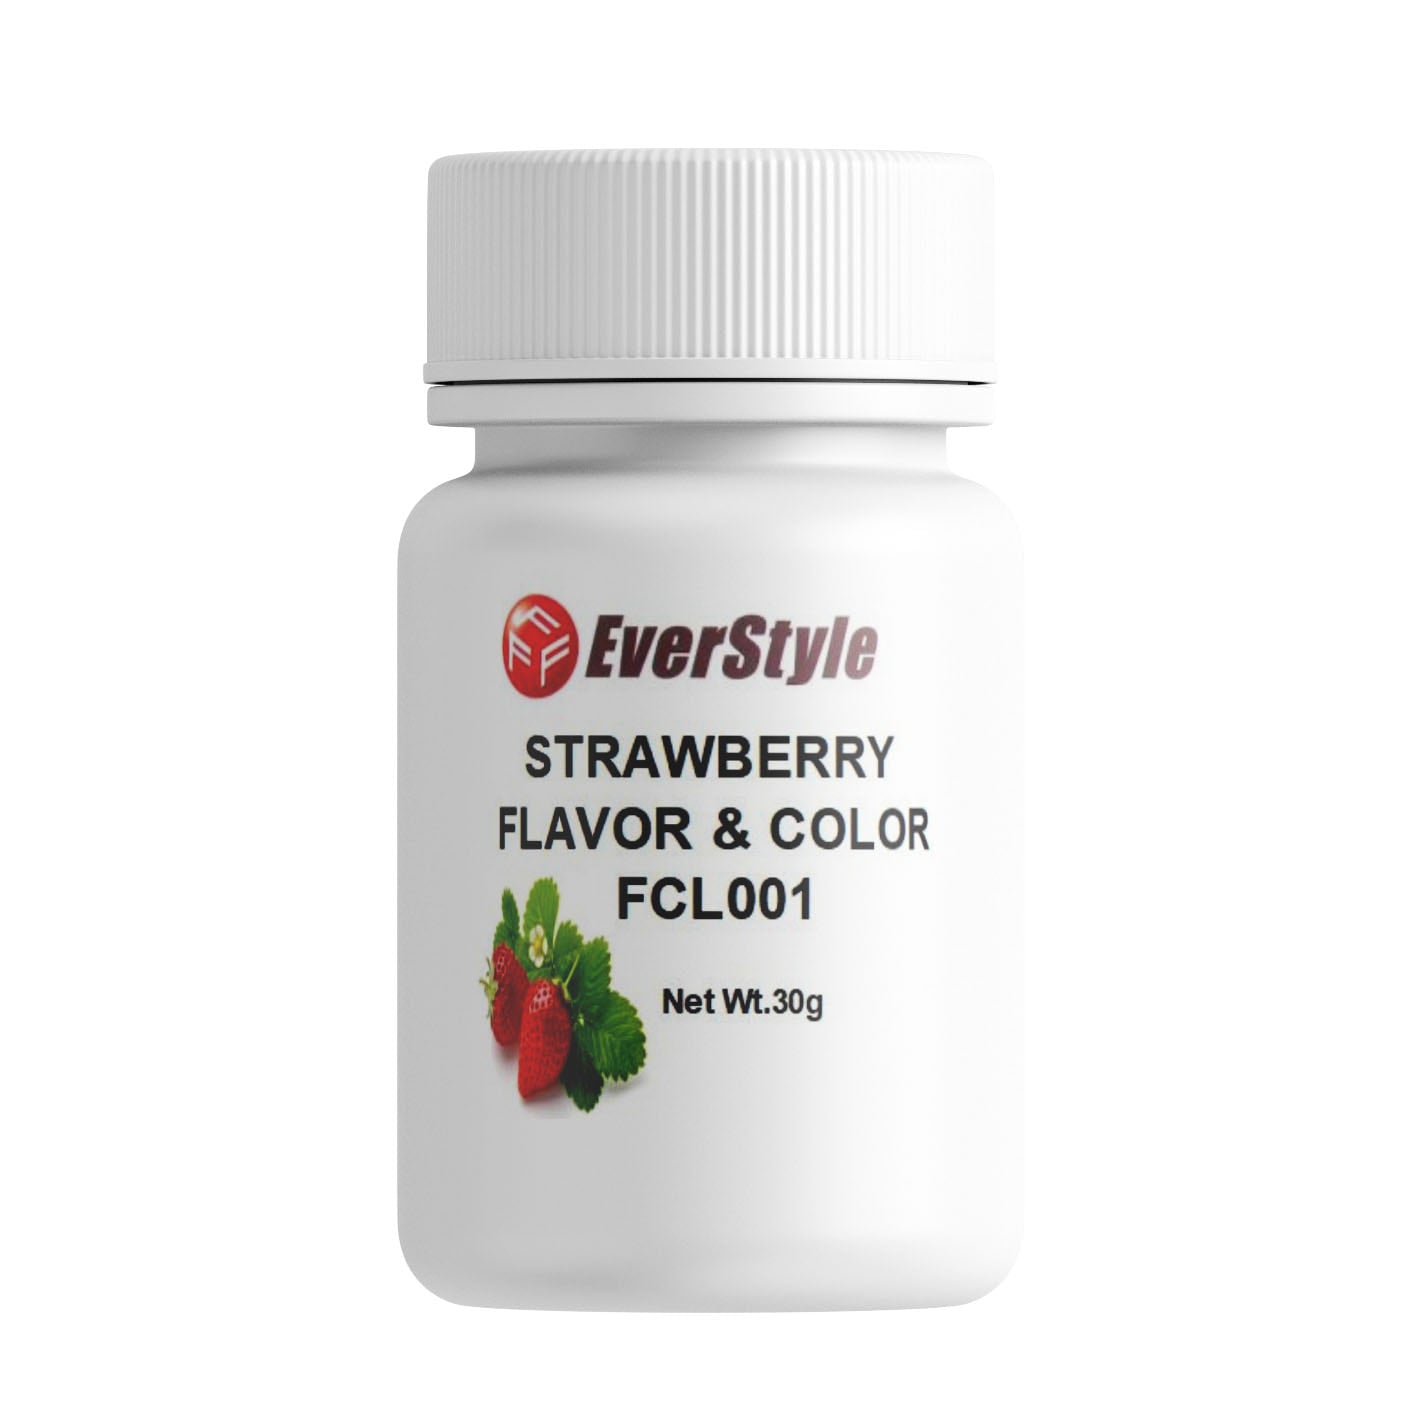 Everstyle Strawberry Flavor and Color 30g (FCL001)